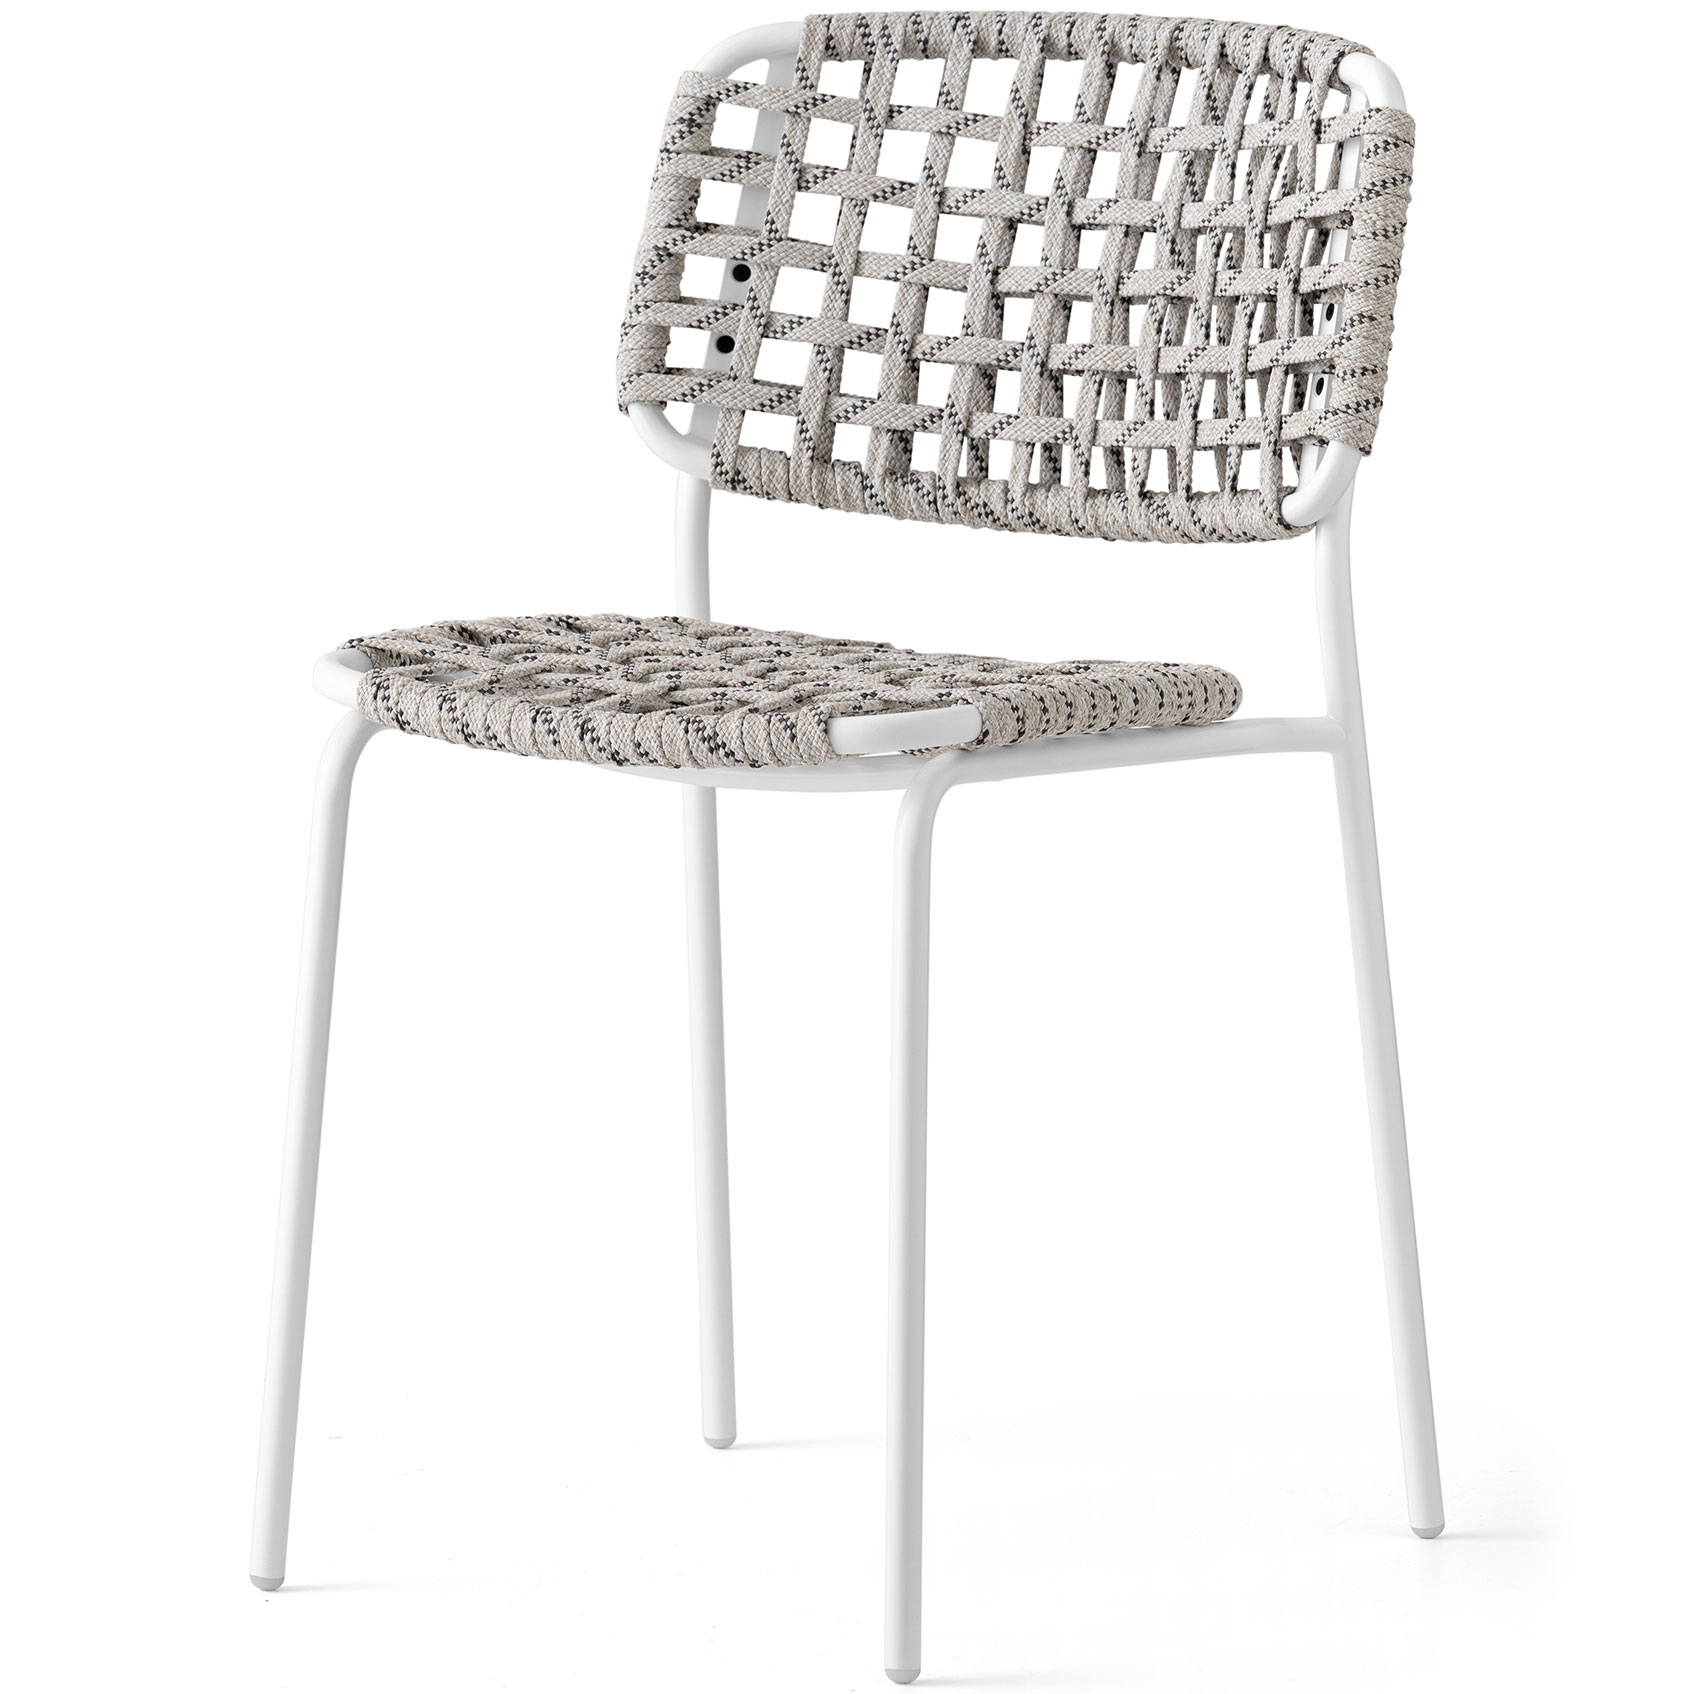 Yo! Outdoor Woven Rope Chair by Connubia | CB1986030094STA00000000 |  CON1119907